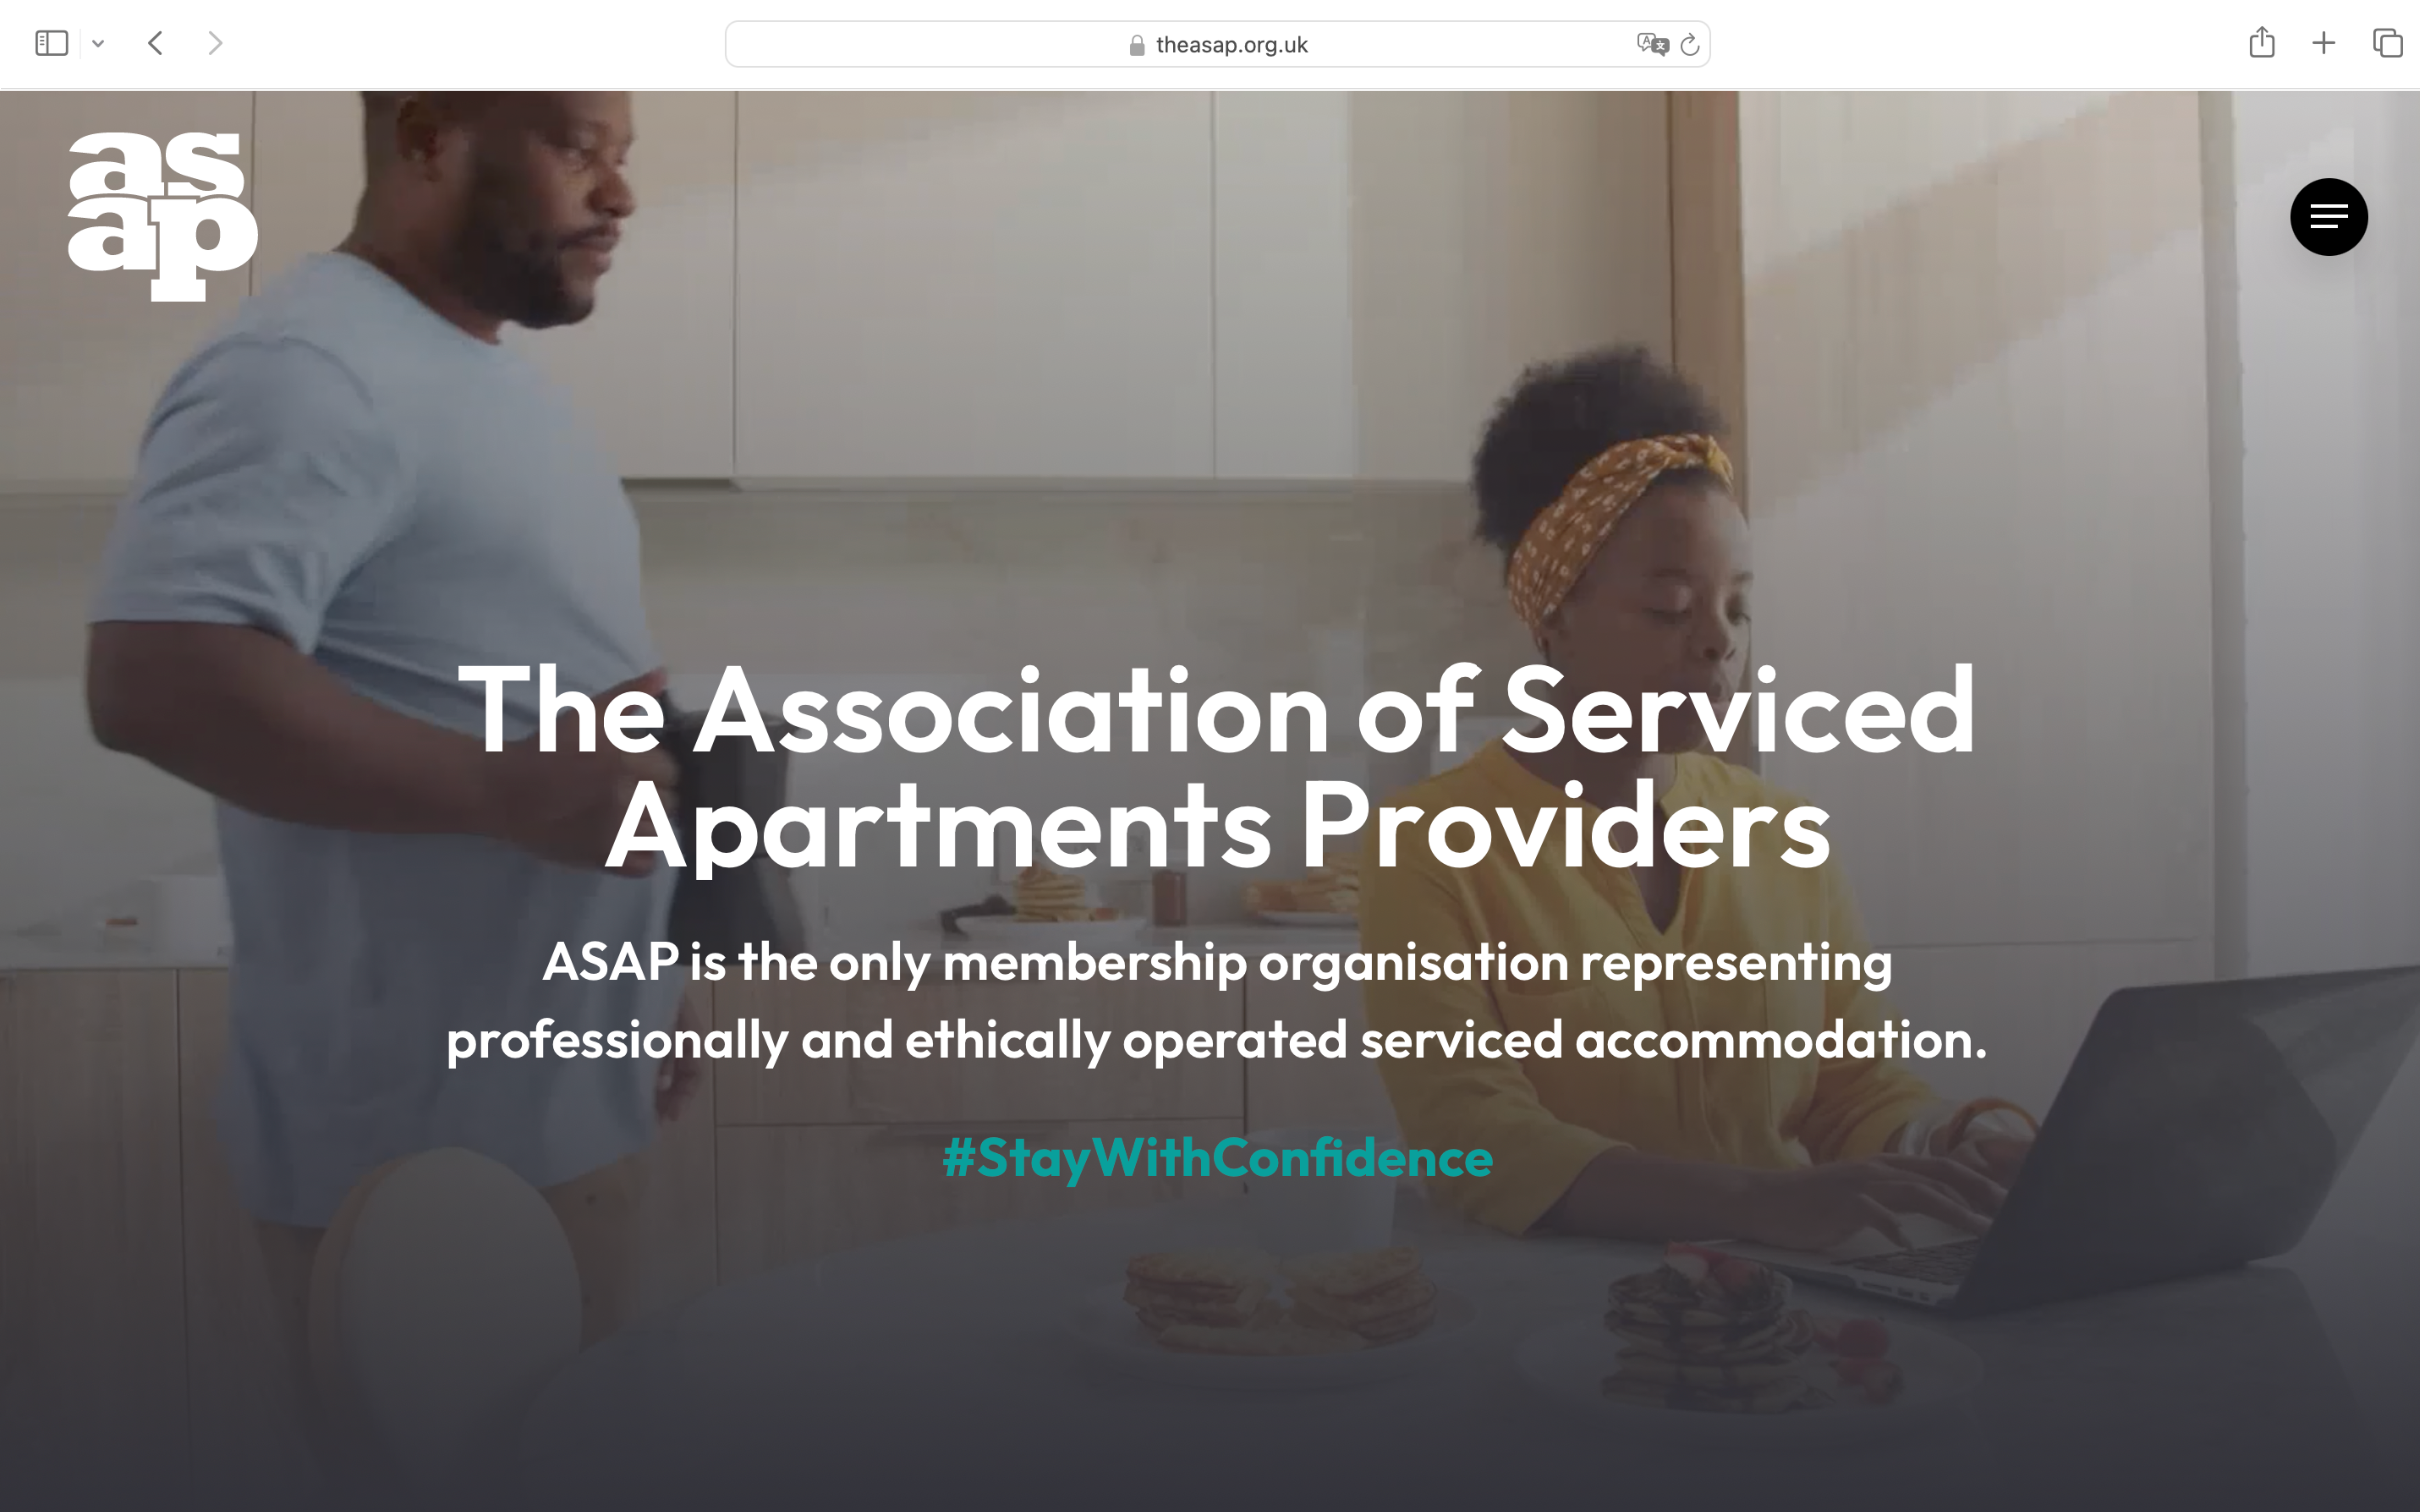 A screenshot of the new version of The ASAP's homepage, with an image of a Black man standing in a kitchen while a Black woman is sitting on a chair and typing on a laptop. The man is looking at the laptop screen and holding a mug in his right hand. The title "The Association of Serviced Apartments Providers" is shown in white, big and bold font across the page. Underneath, the text "ASAP is the only membership organisation representing professionally and ethically operated serviced accommodations" are shown in a white text box above the image of the apartment, with the text in white. Under this is, the hashtag "#StatWithConfidence" is shown in light blue font. The ASAP logo appears on the left hand corner of the page in white font, while the menu button appears on the right as a black circle with three white lines across it.